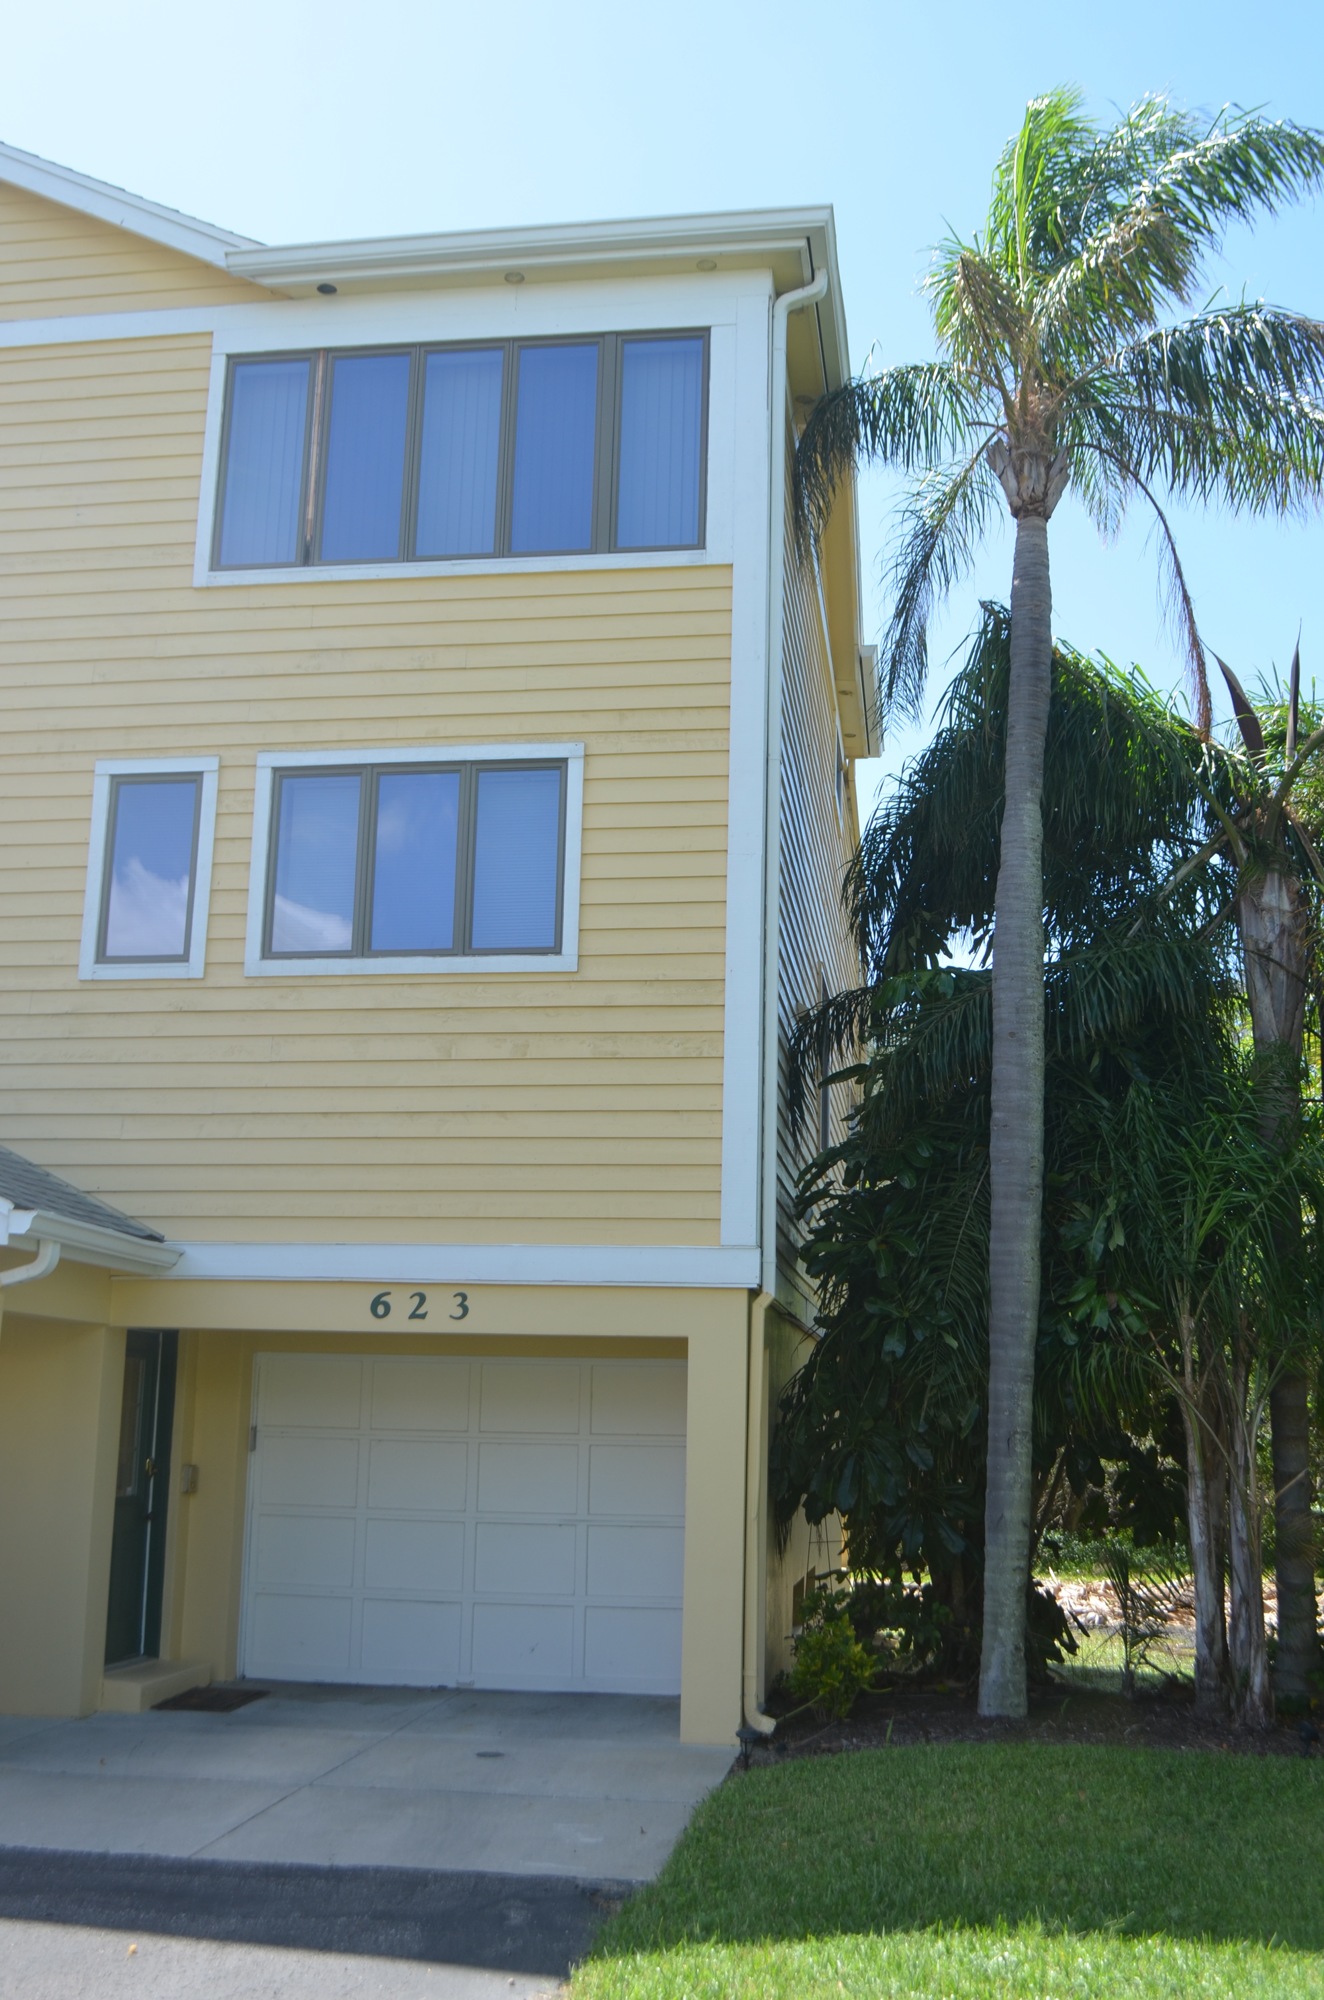 The condo at 623 Cedars Court is valued at $170,850, according to the Manatee County Appraiser’s office. But state law does not permit town officials to take this into account when filing a civil asset forfeiture complaint.